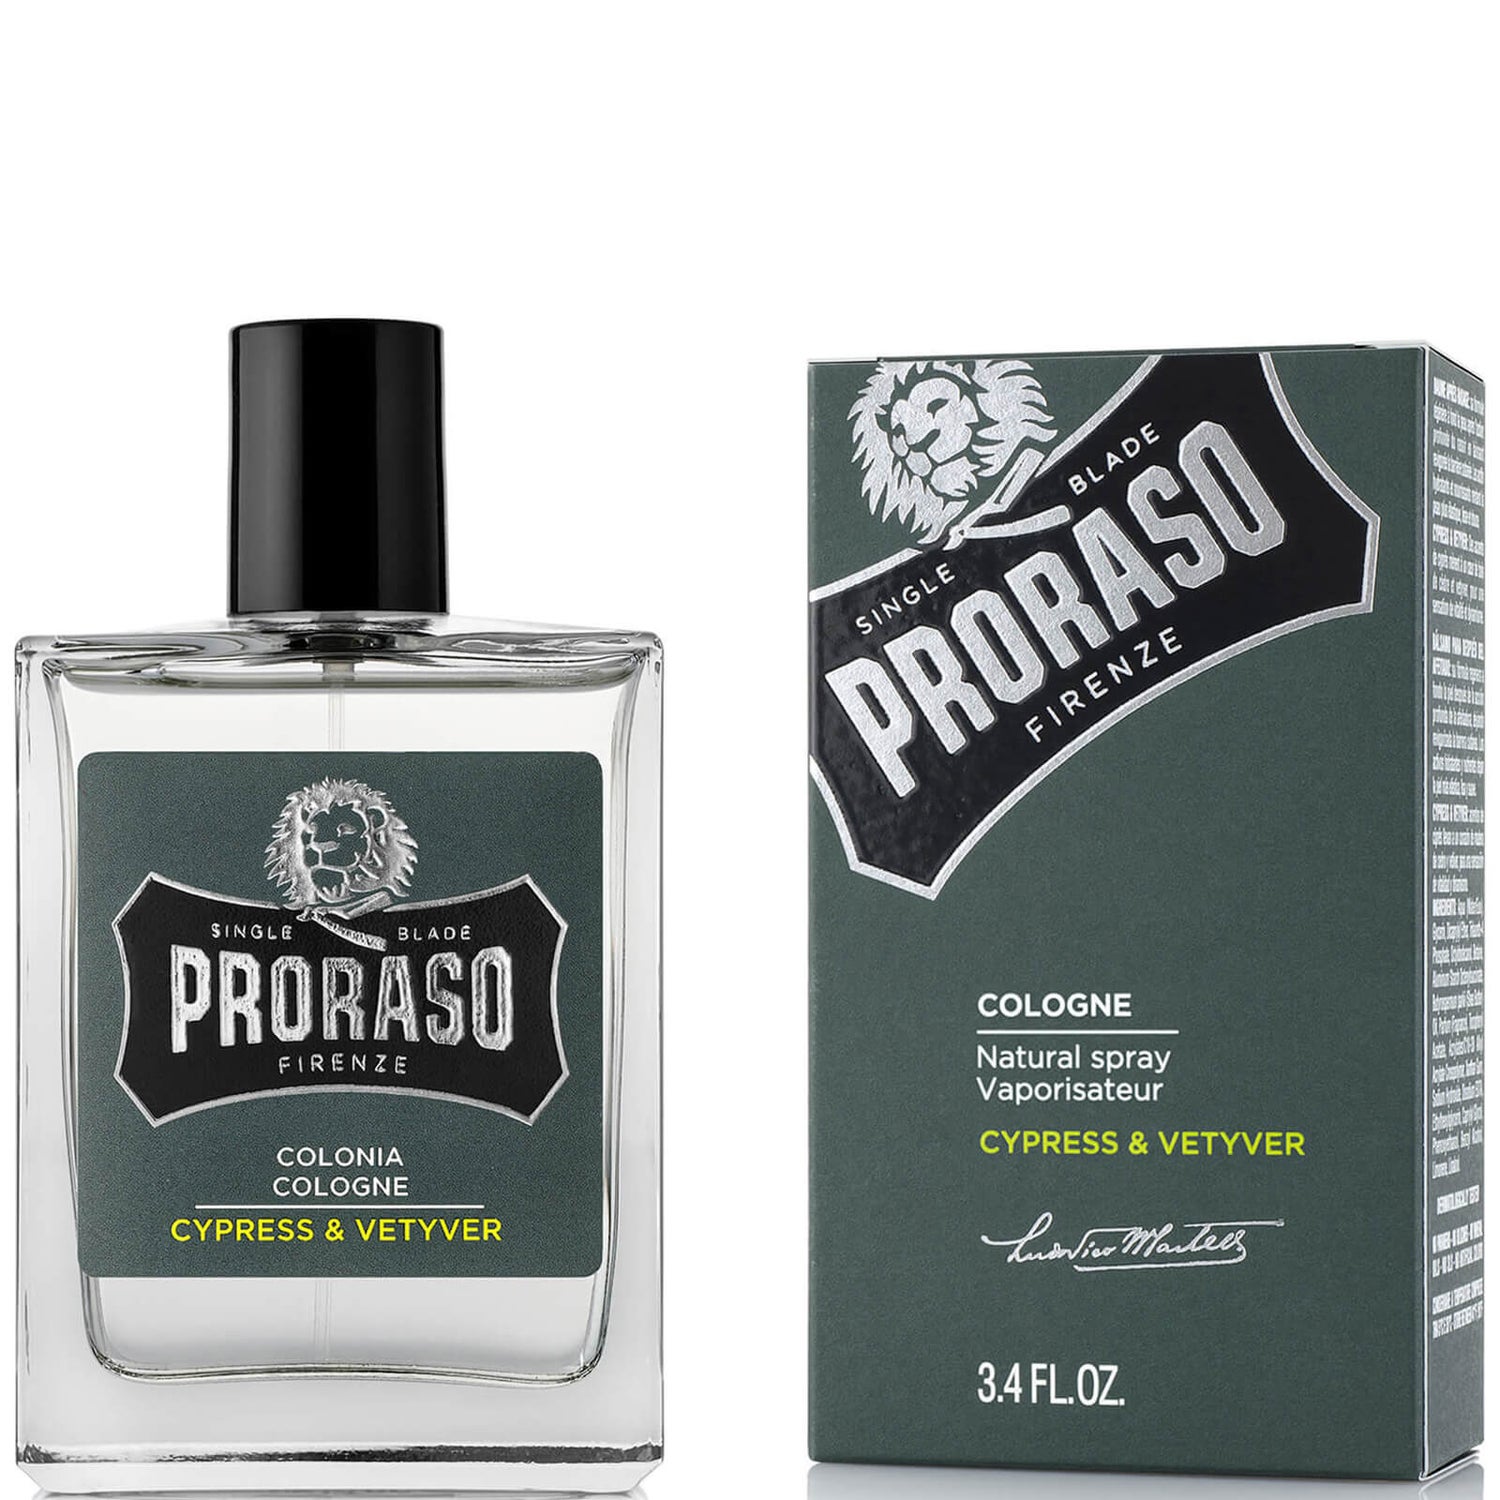 Proraso Cypress and Vetyver Cologne 100 ml